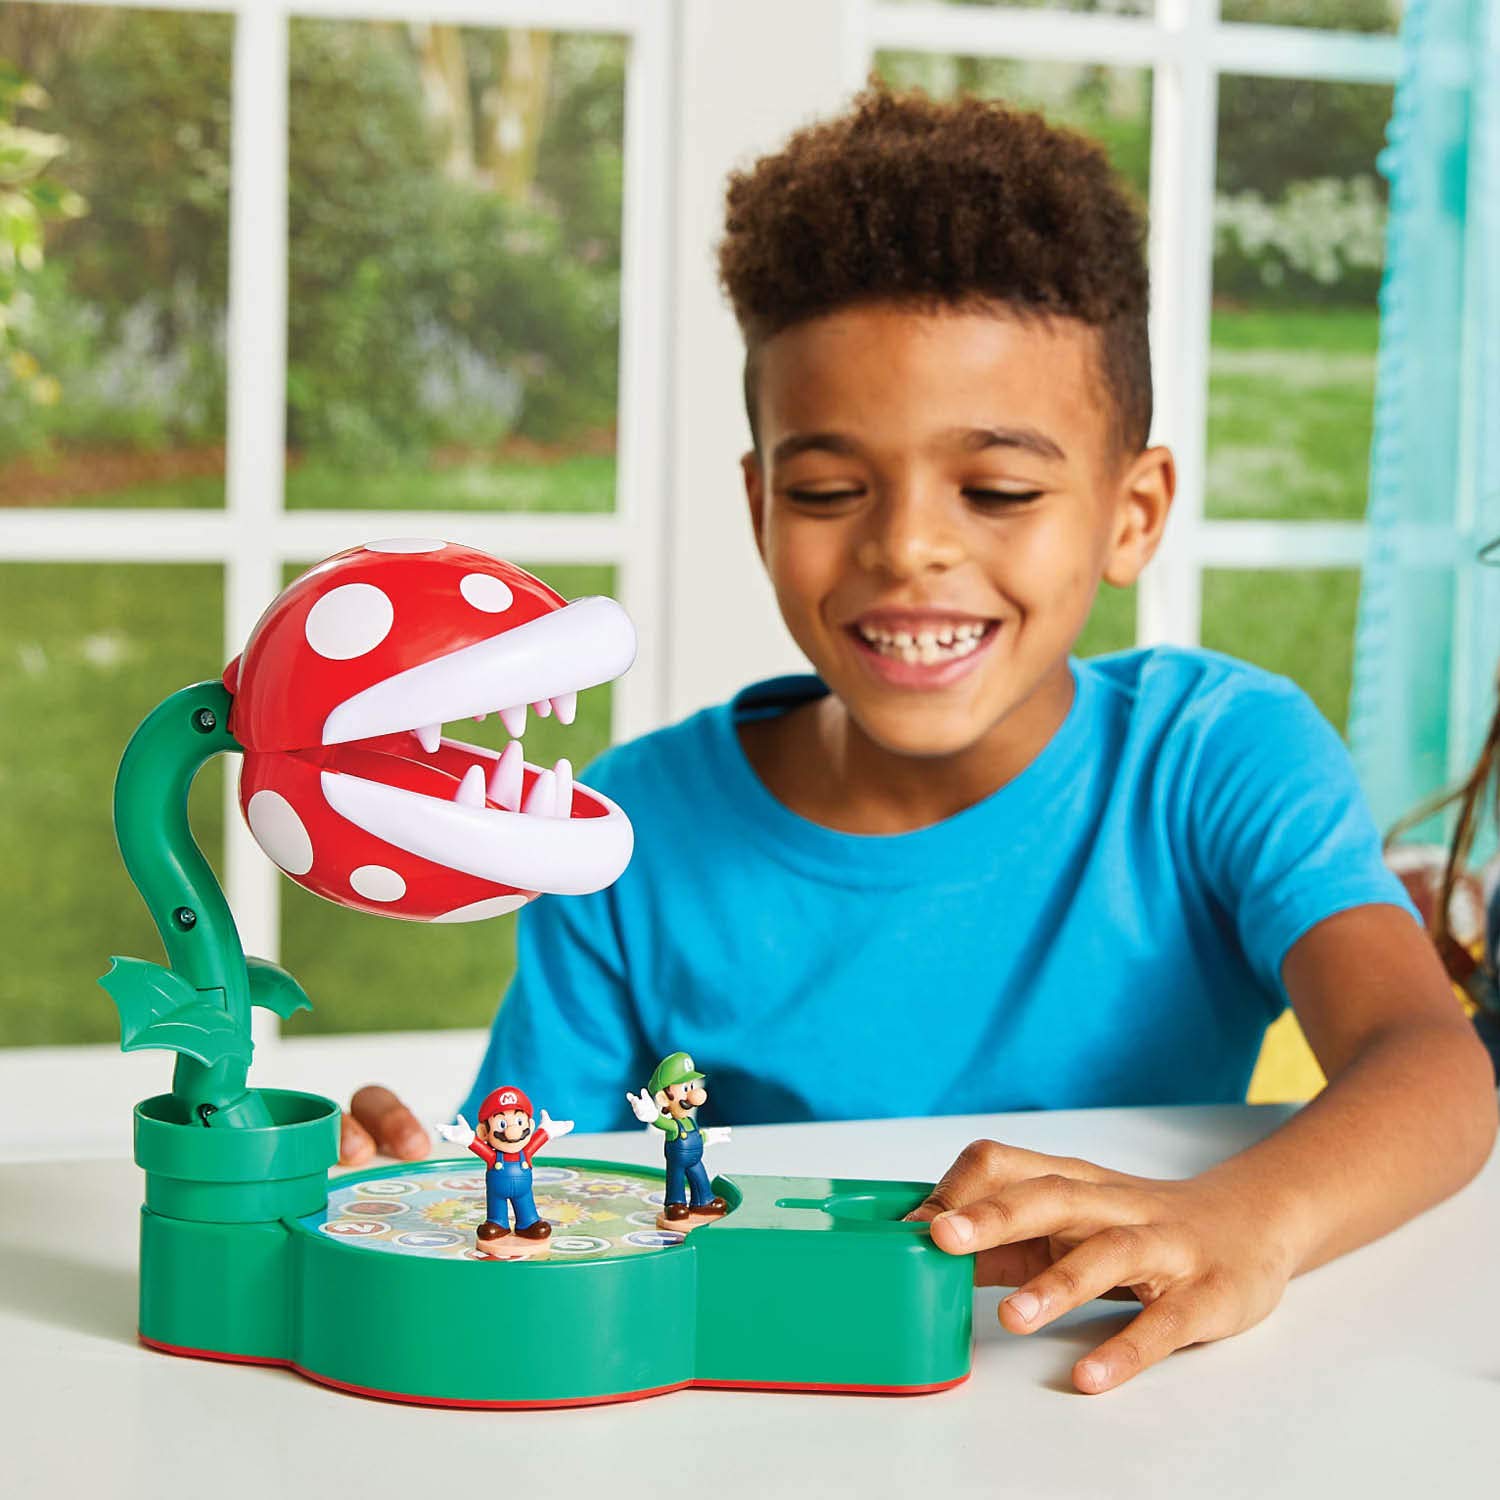 Epoch Games Super Mario Piranha Plant Escape!, Tabletop Action Game for Ages 4+ with 2 Collectible Super Mario Action Figures